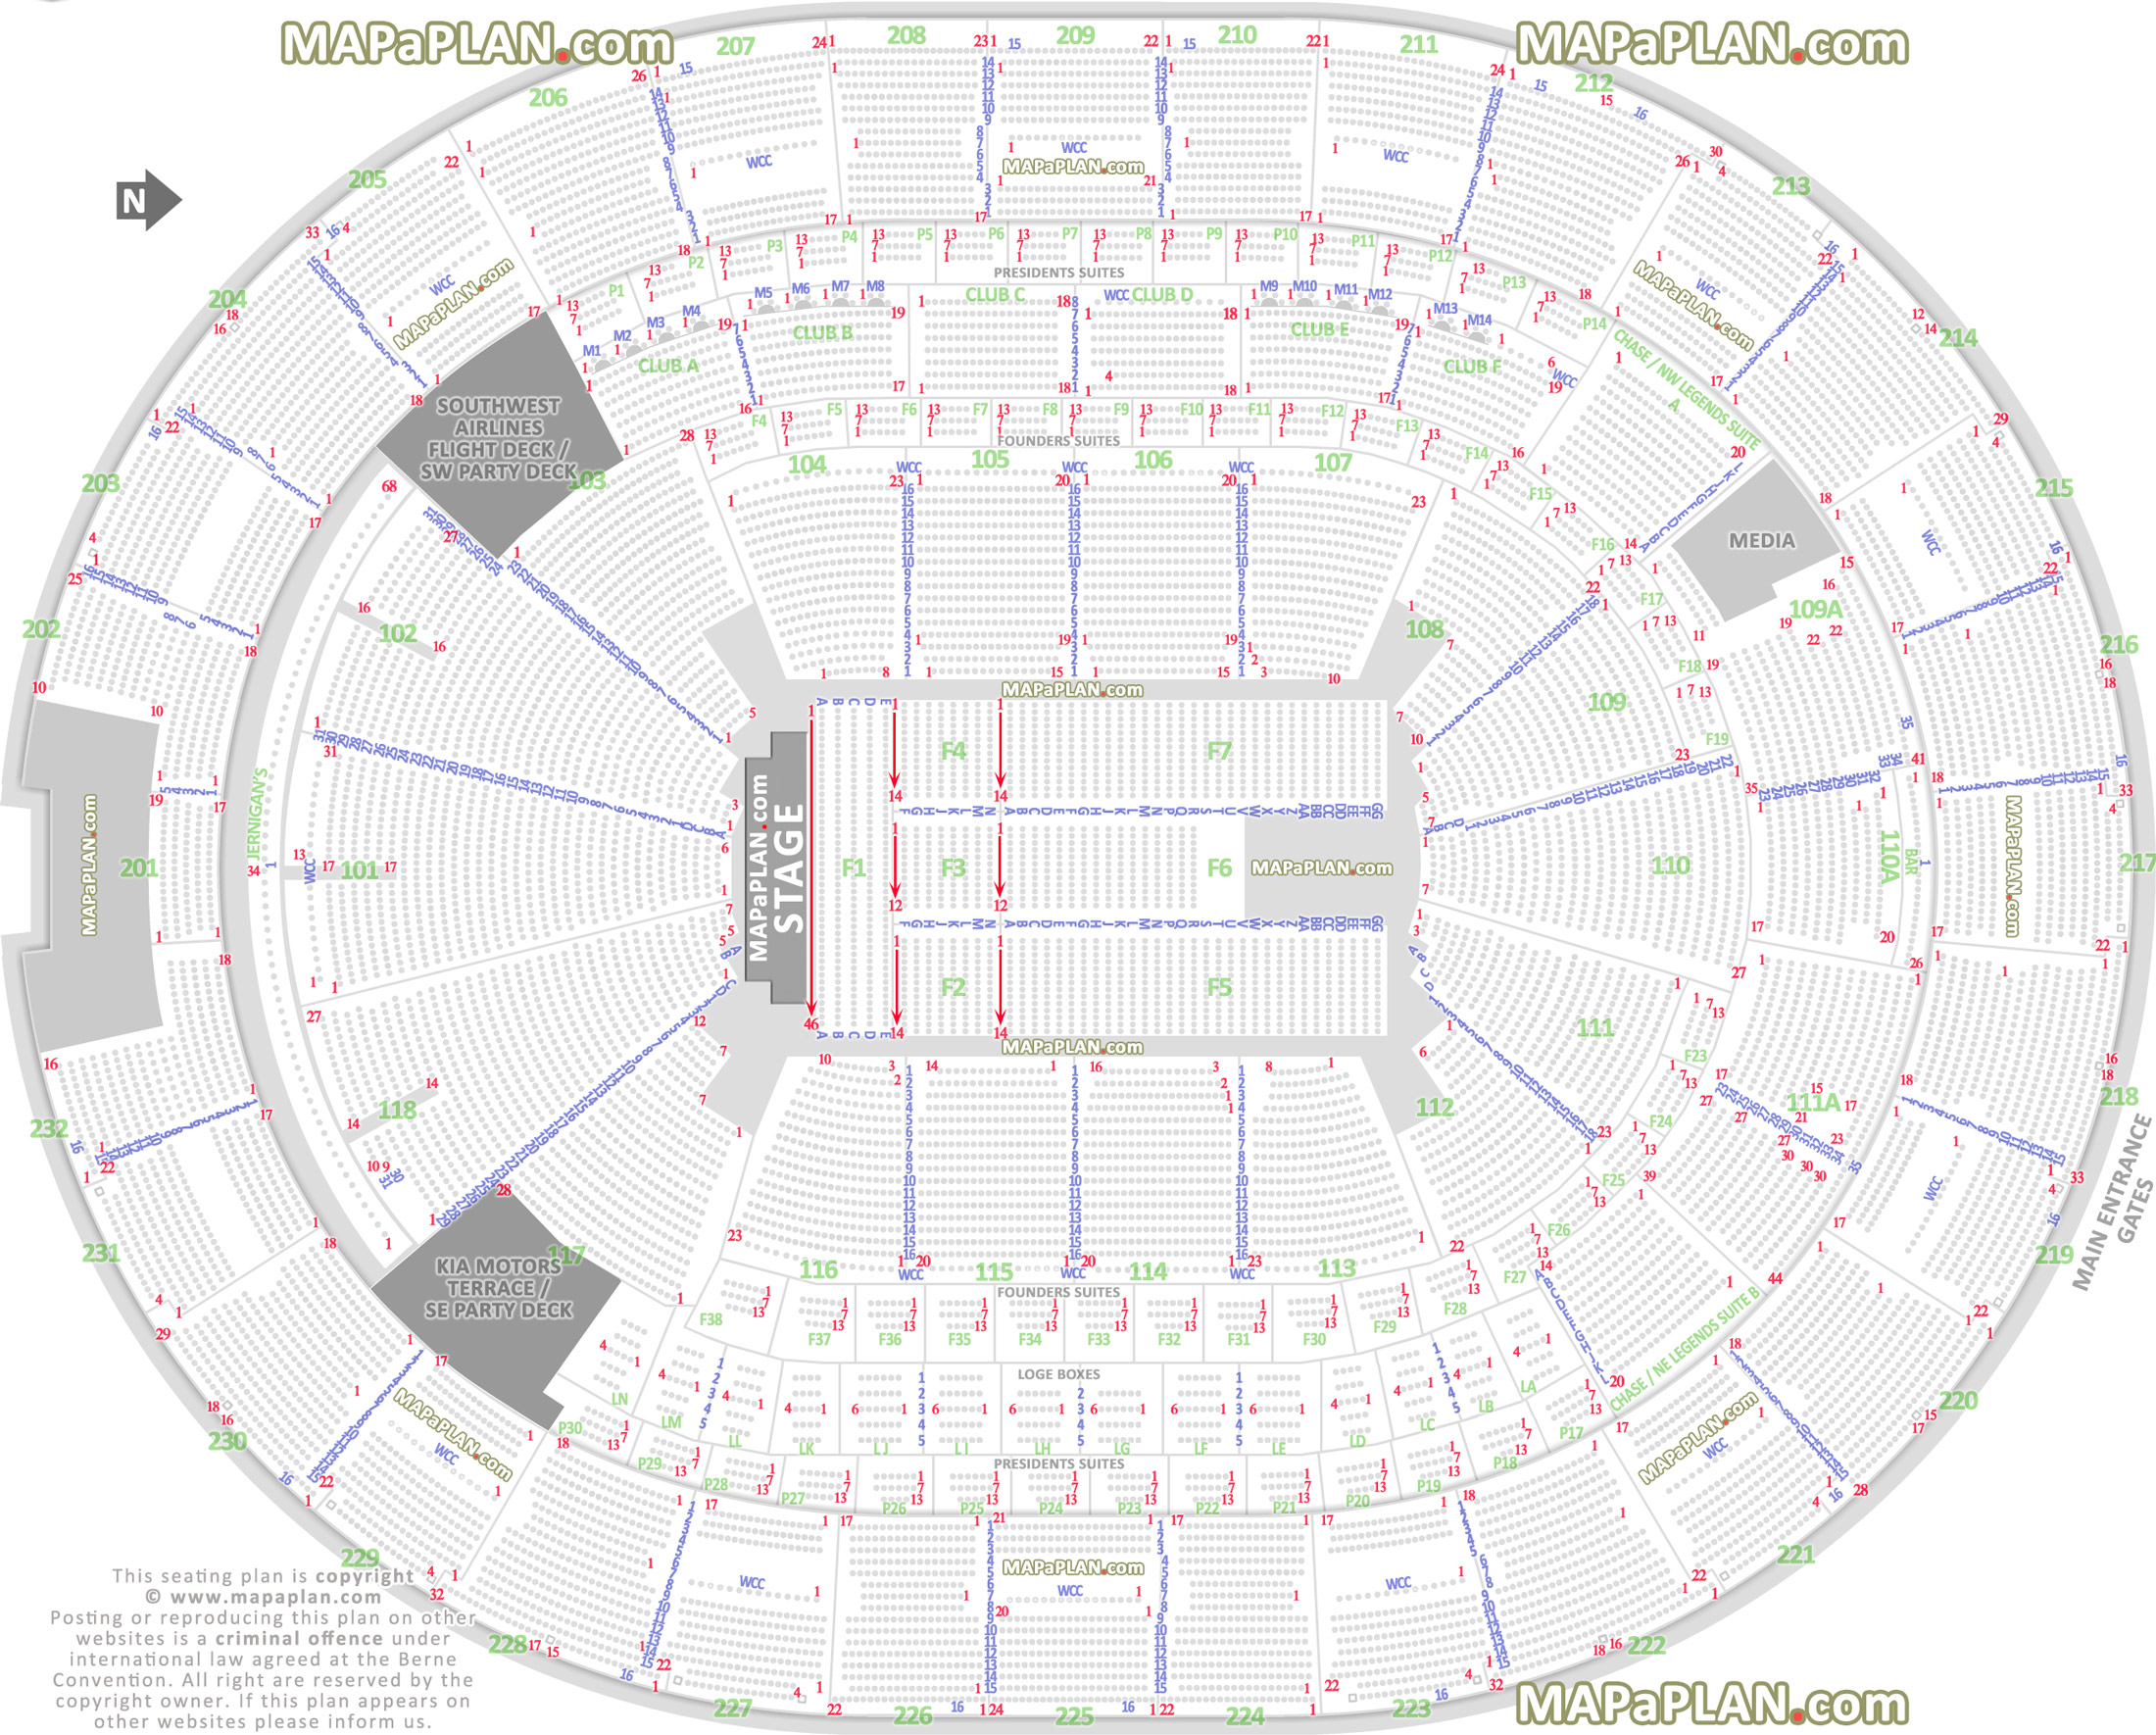 detailed seat row numbers end stage concert sections floor plan map arena lower upper bowl layout Orlando Amway Center seating chart